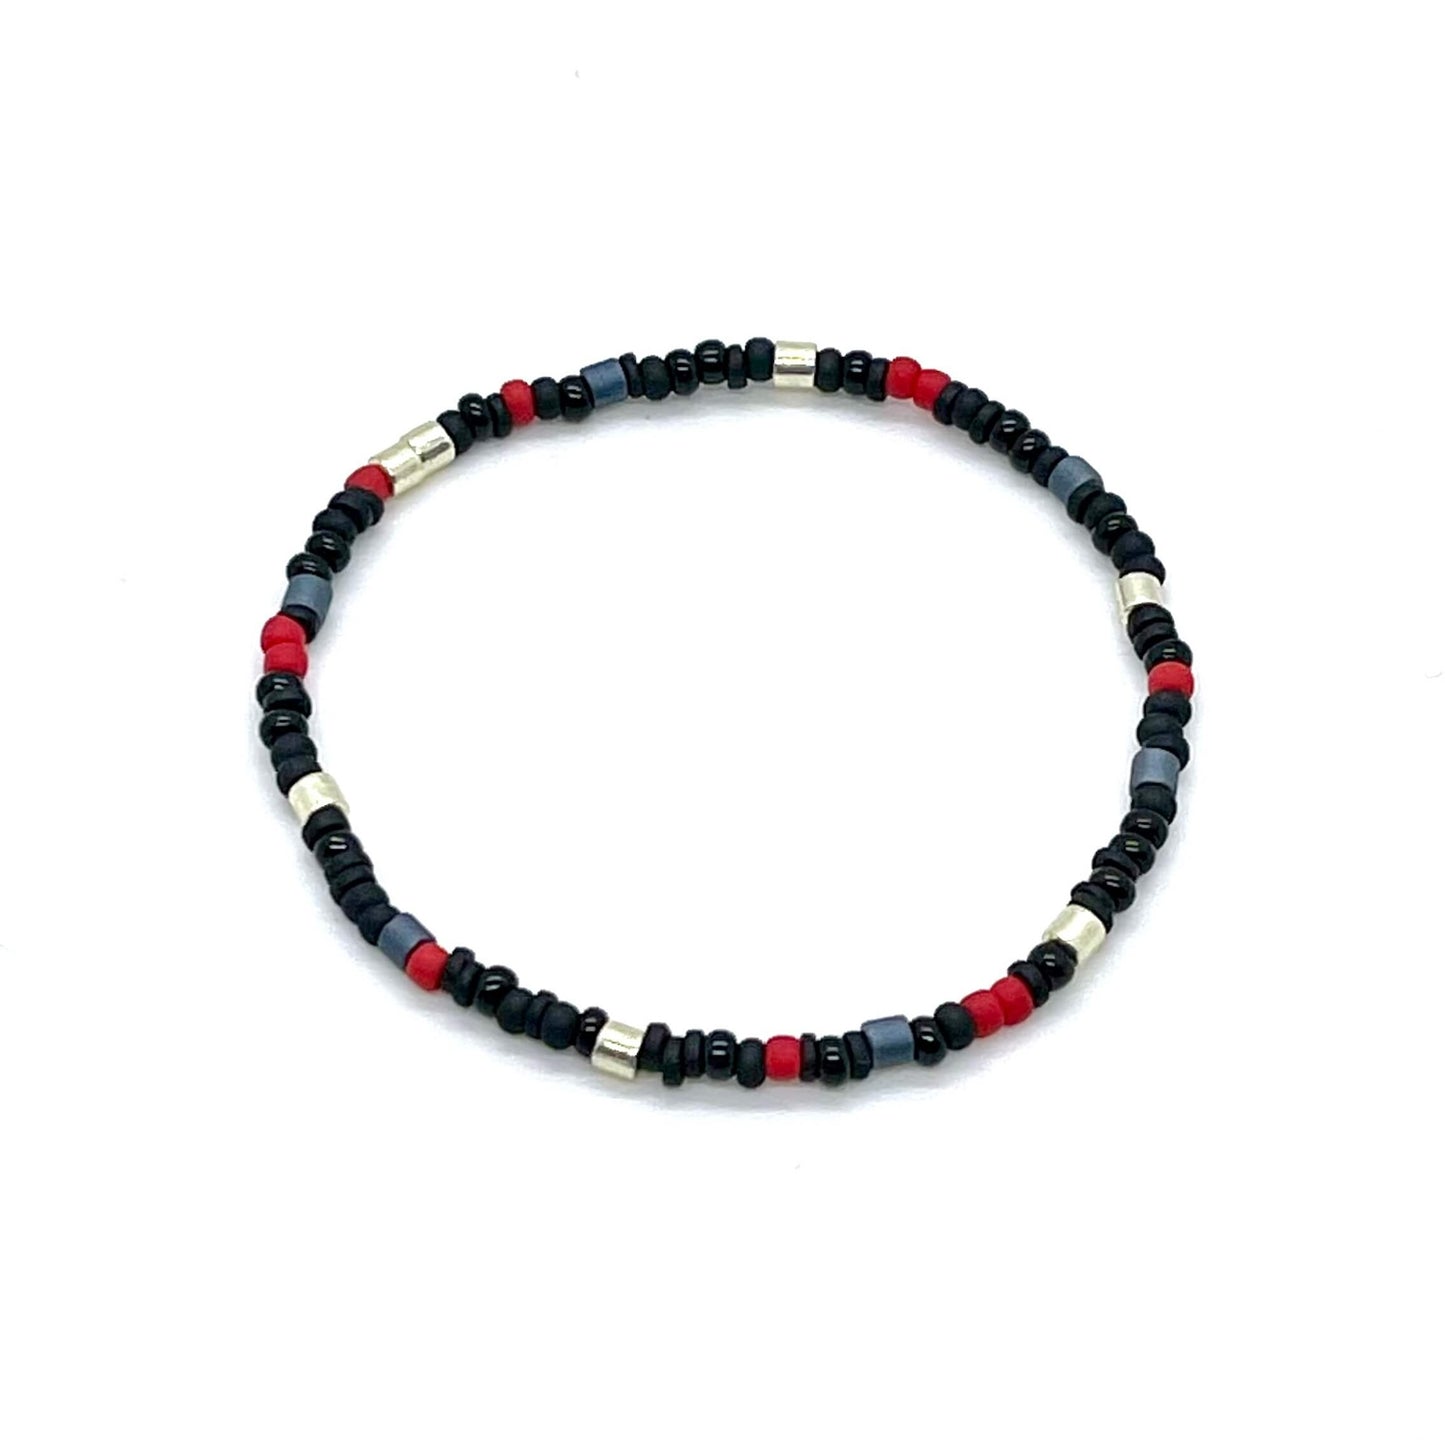 Men's black and red thin seed bead stretch bracelet with silver accent beads.